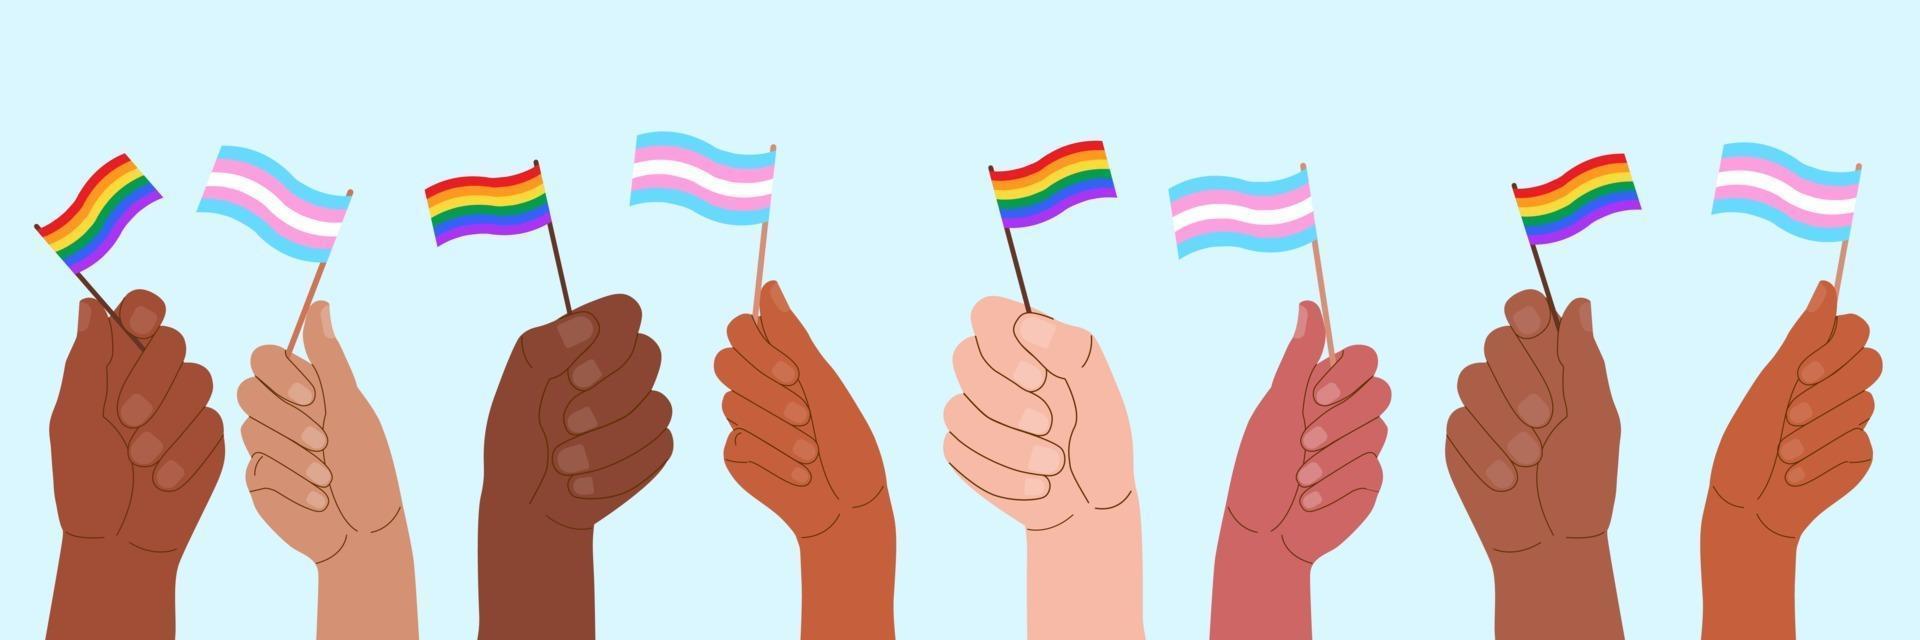 People hold flags with LGBT symbols. vector